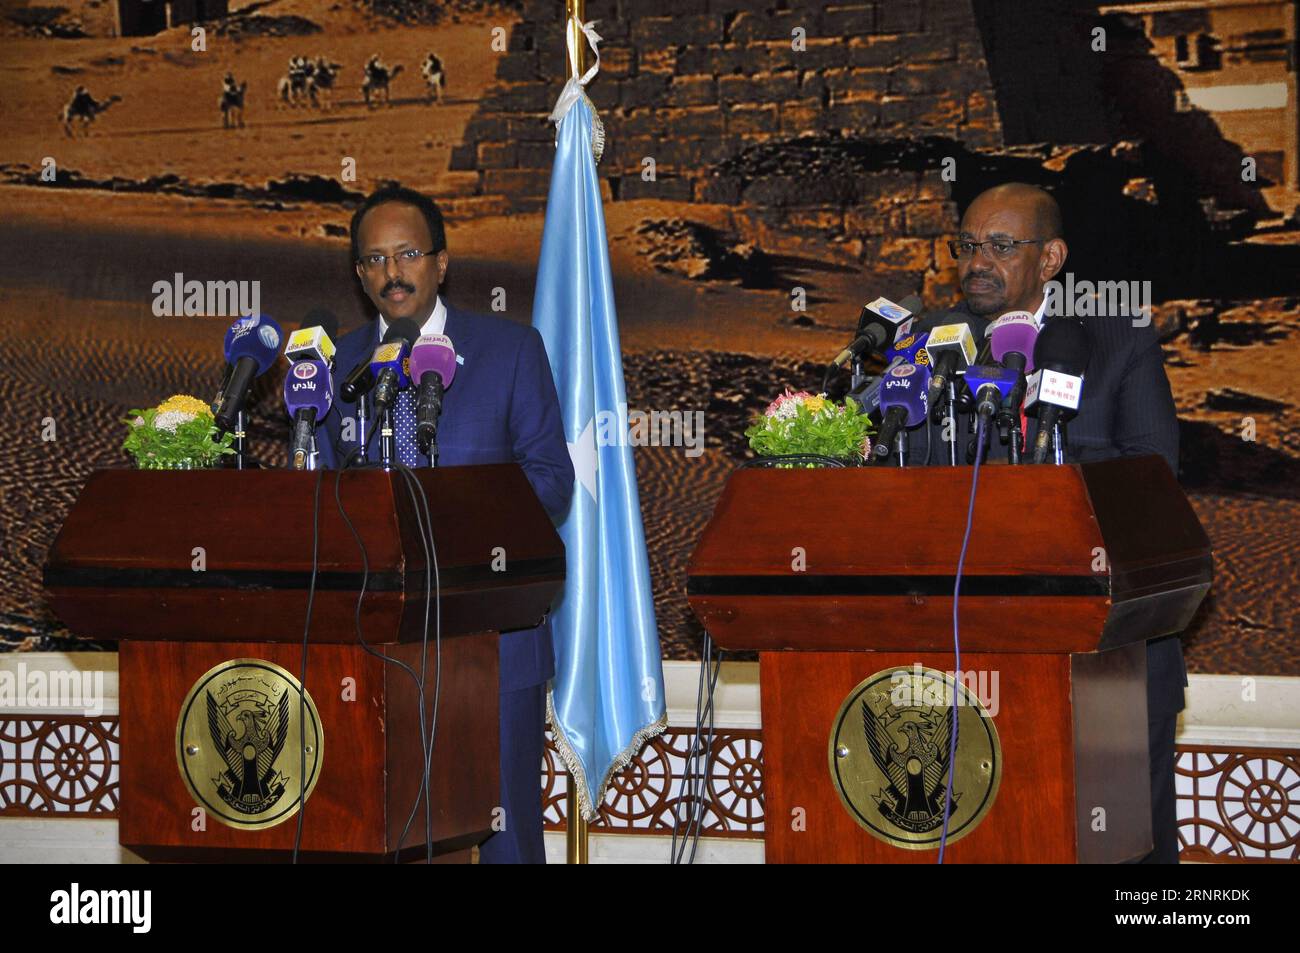 (171005) -- KHARTOUM, Oct. 5, 2017 -- Sudanese President Omar al-Bashir (R)?and his Somali counterpart Mohamed Abdullahi Mohamed attend a joint press conference in Khartoum, capital of Sudan, on Oct. 5, 2017. Omar al-Bashir said on Thursday that his country would exert utmost efforts for peace and stability in Somalia. The President made the remarks at the joint press conference after a meeting with Mohamed Abdullahi Mohamed in the capital. ) SUDAN-KHARTOUM-PRESIDENT-SOMALI PRESIDENT-EFFORTS FOR PEACE AND STABILITY IN SOMALIA Mohamed?Khidir PUBLICATIONxNOTxINxCHN Stock Photo